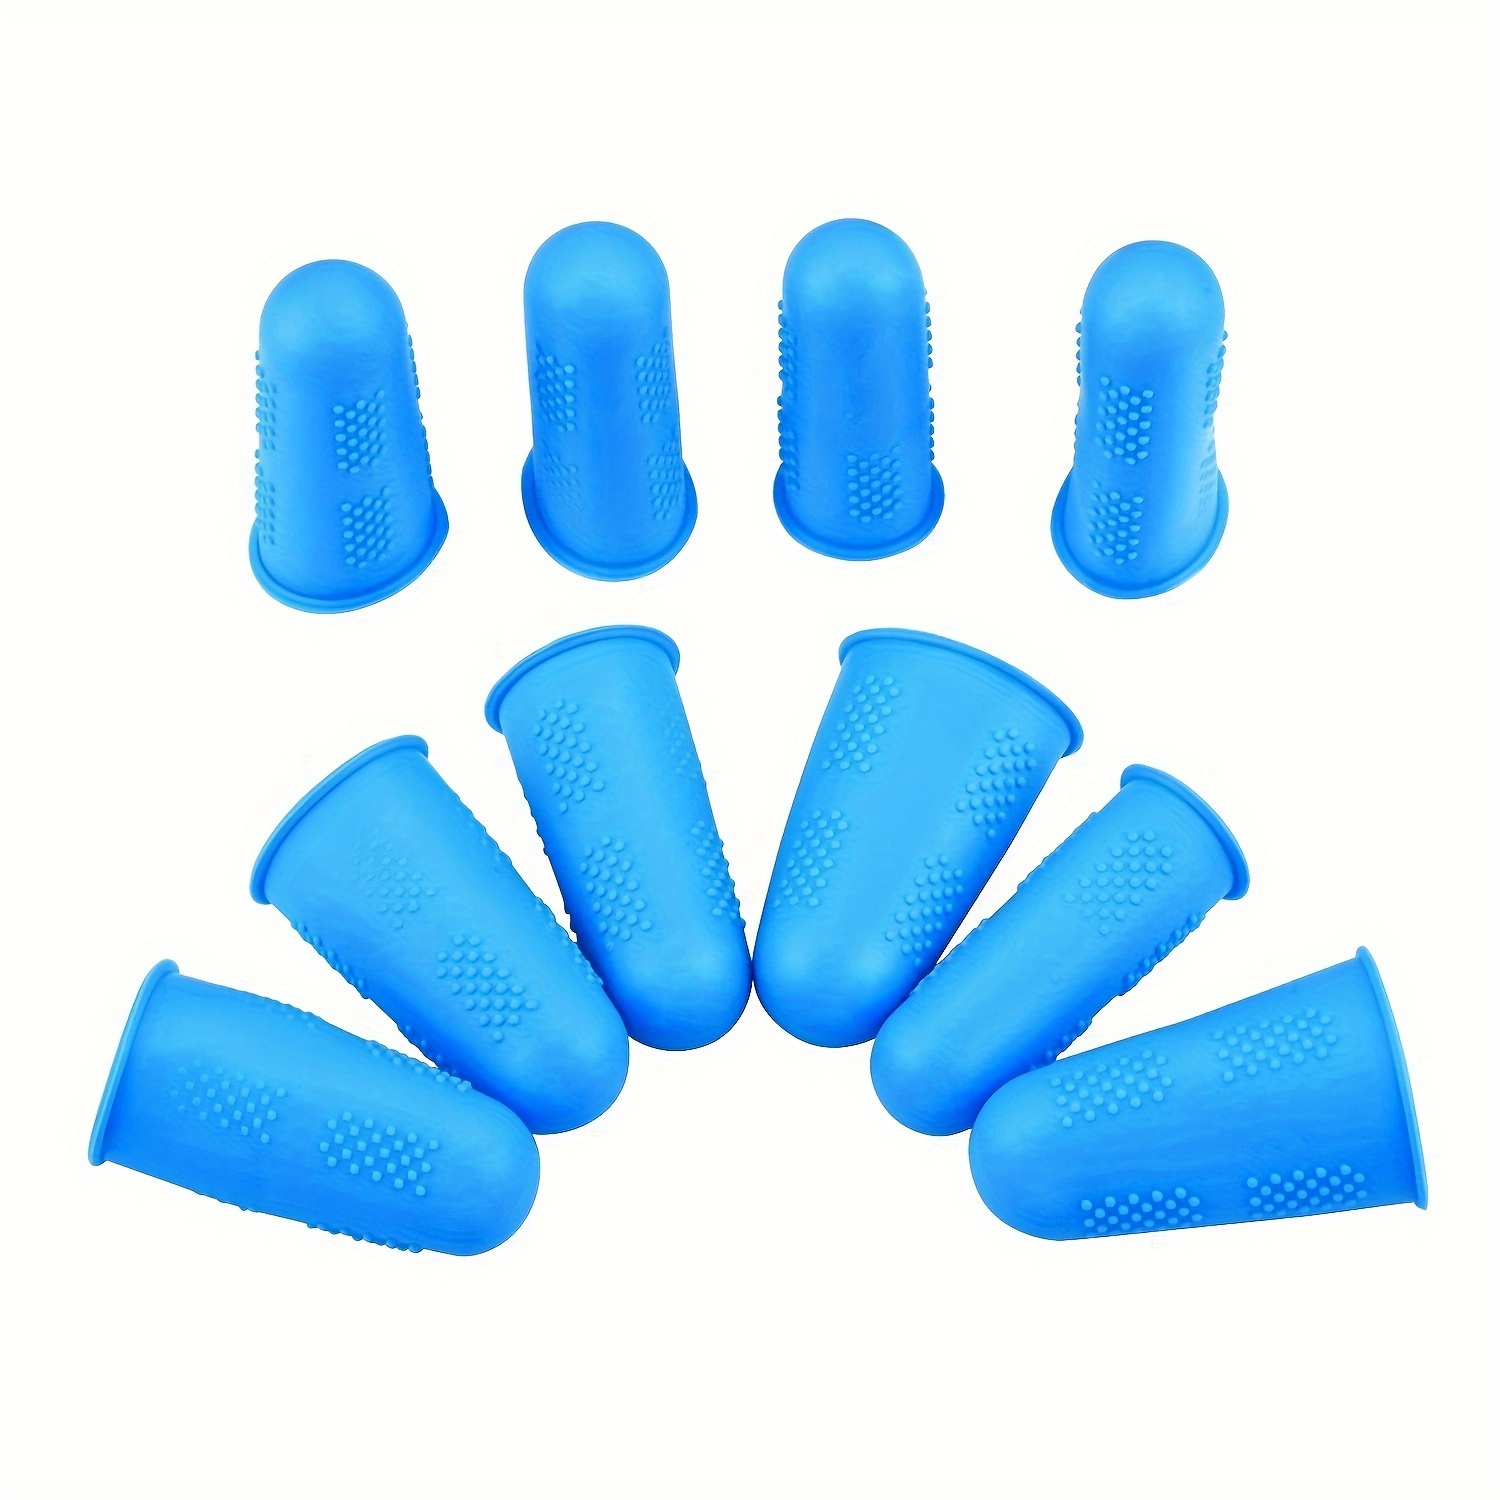  Finger Protectors,12 Pieces, Silicone Finger Protectors, 3  Sizes Rubber Fingers Thimble Protectors Guard Tips Caps Pads Cover for Hot  Glue Gun, Embroidery, Sewing, Cutting